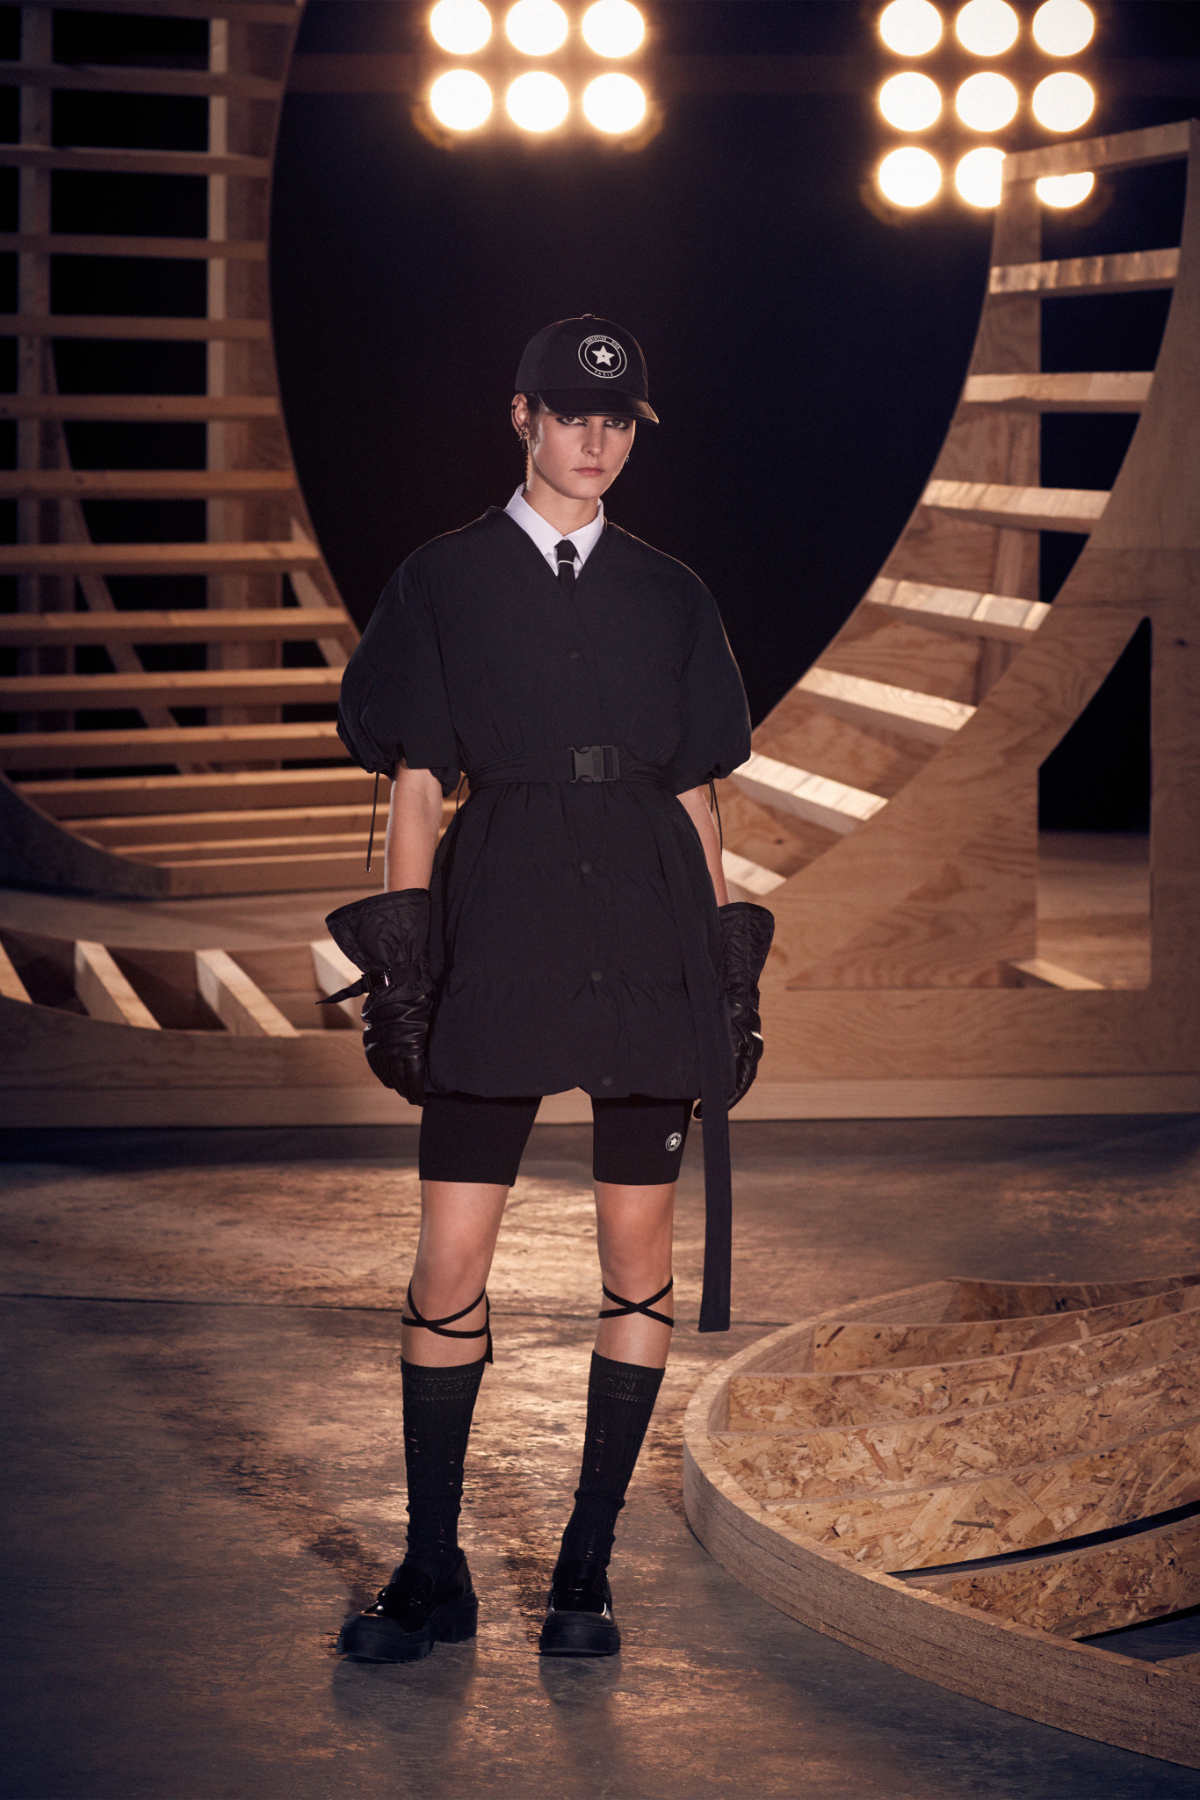 Dior Presents Its New Fall RTW 2022 Women's Collection